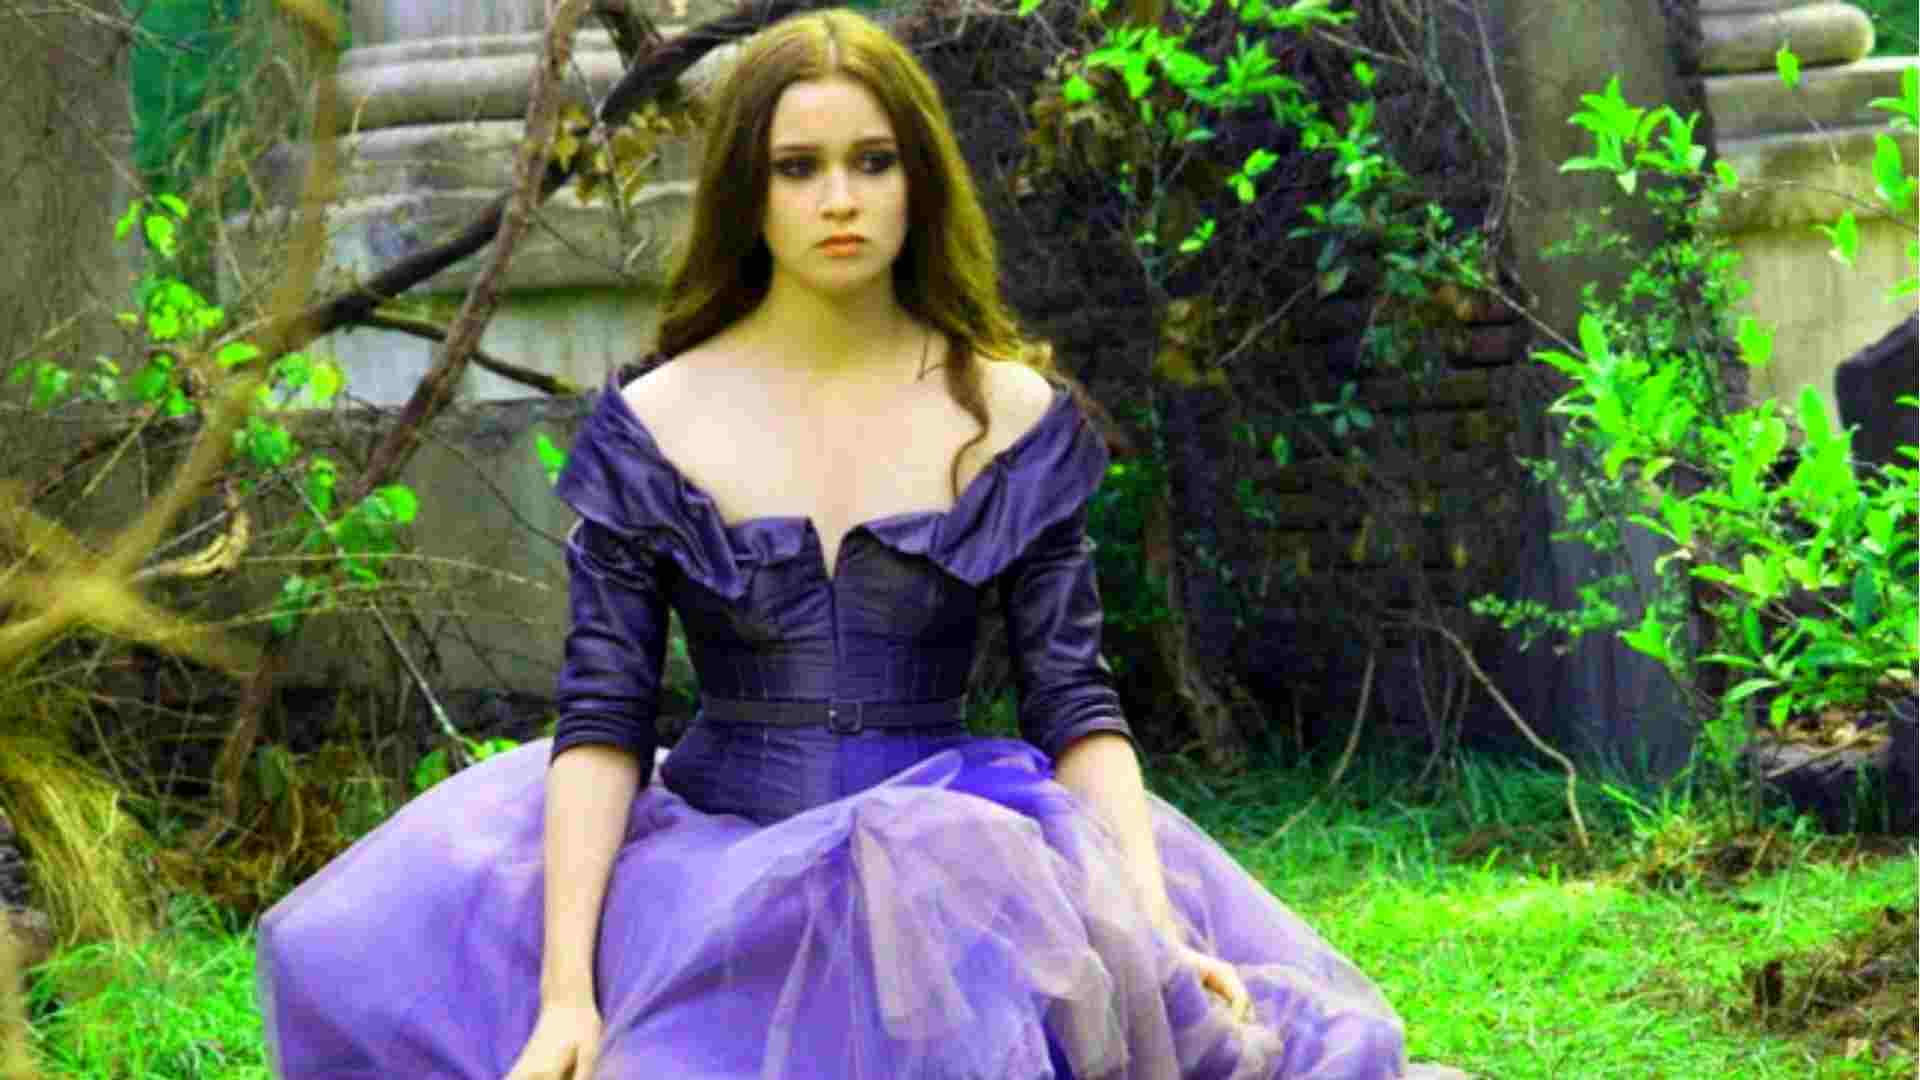 Beautiful Creatures Parents Guide and age rating | 2013 Film